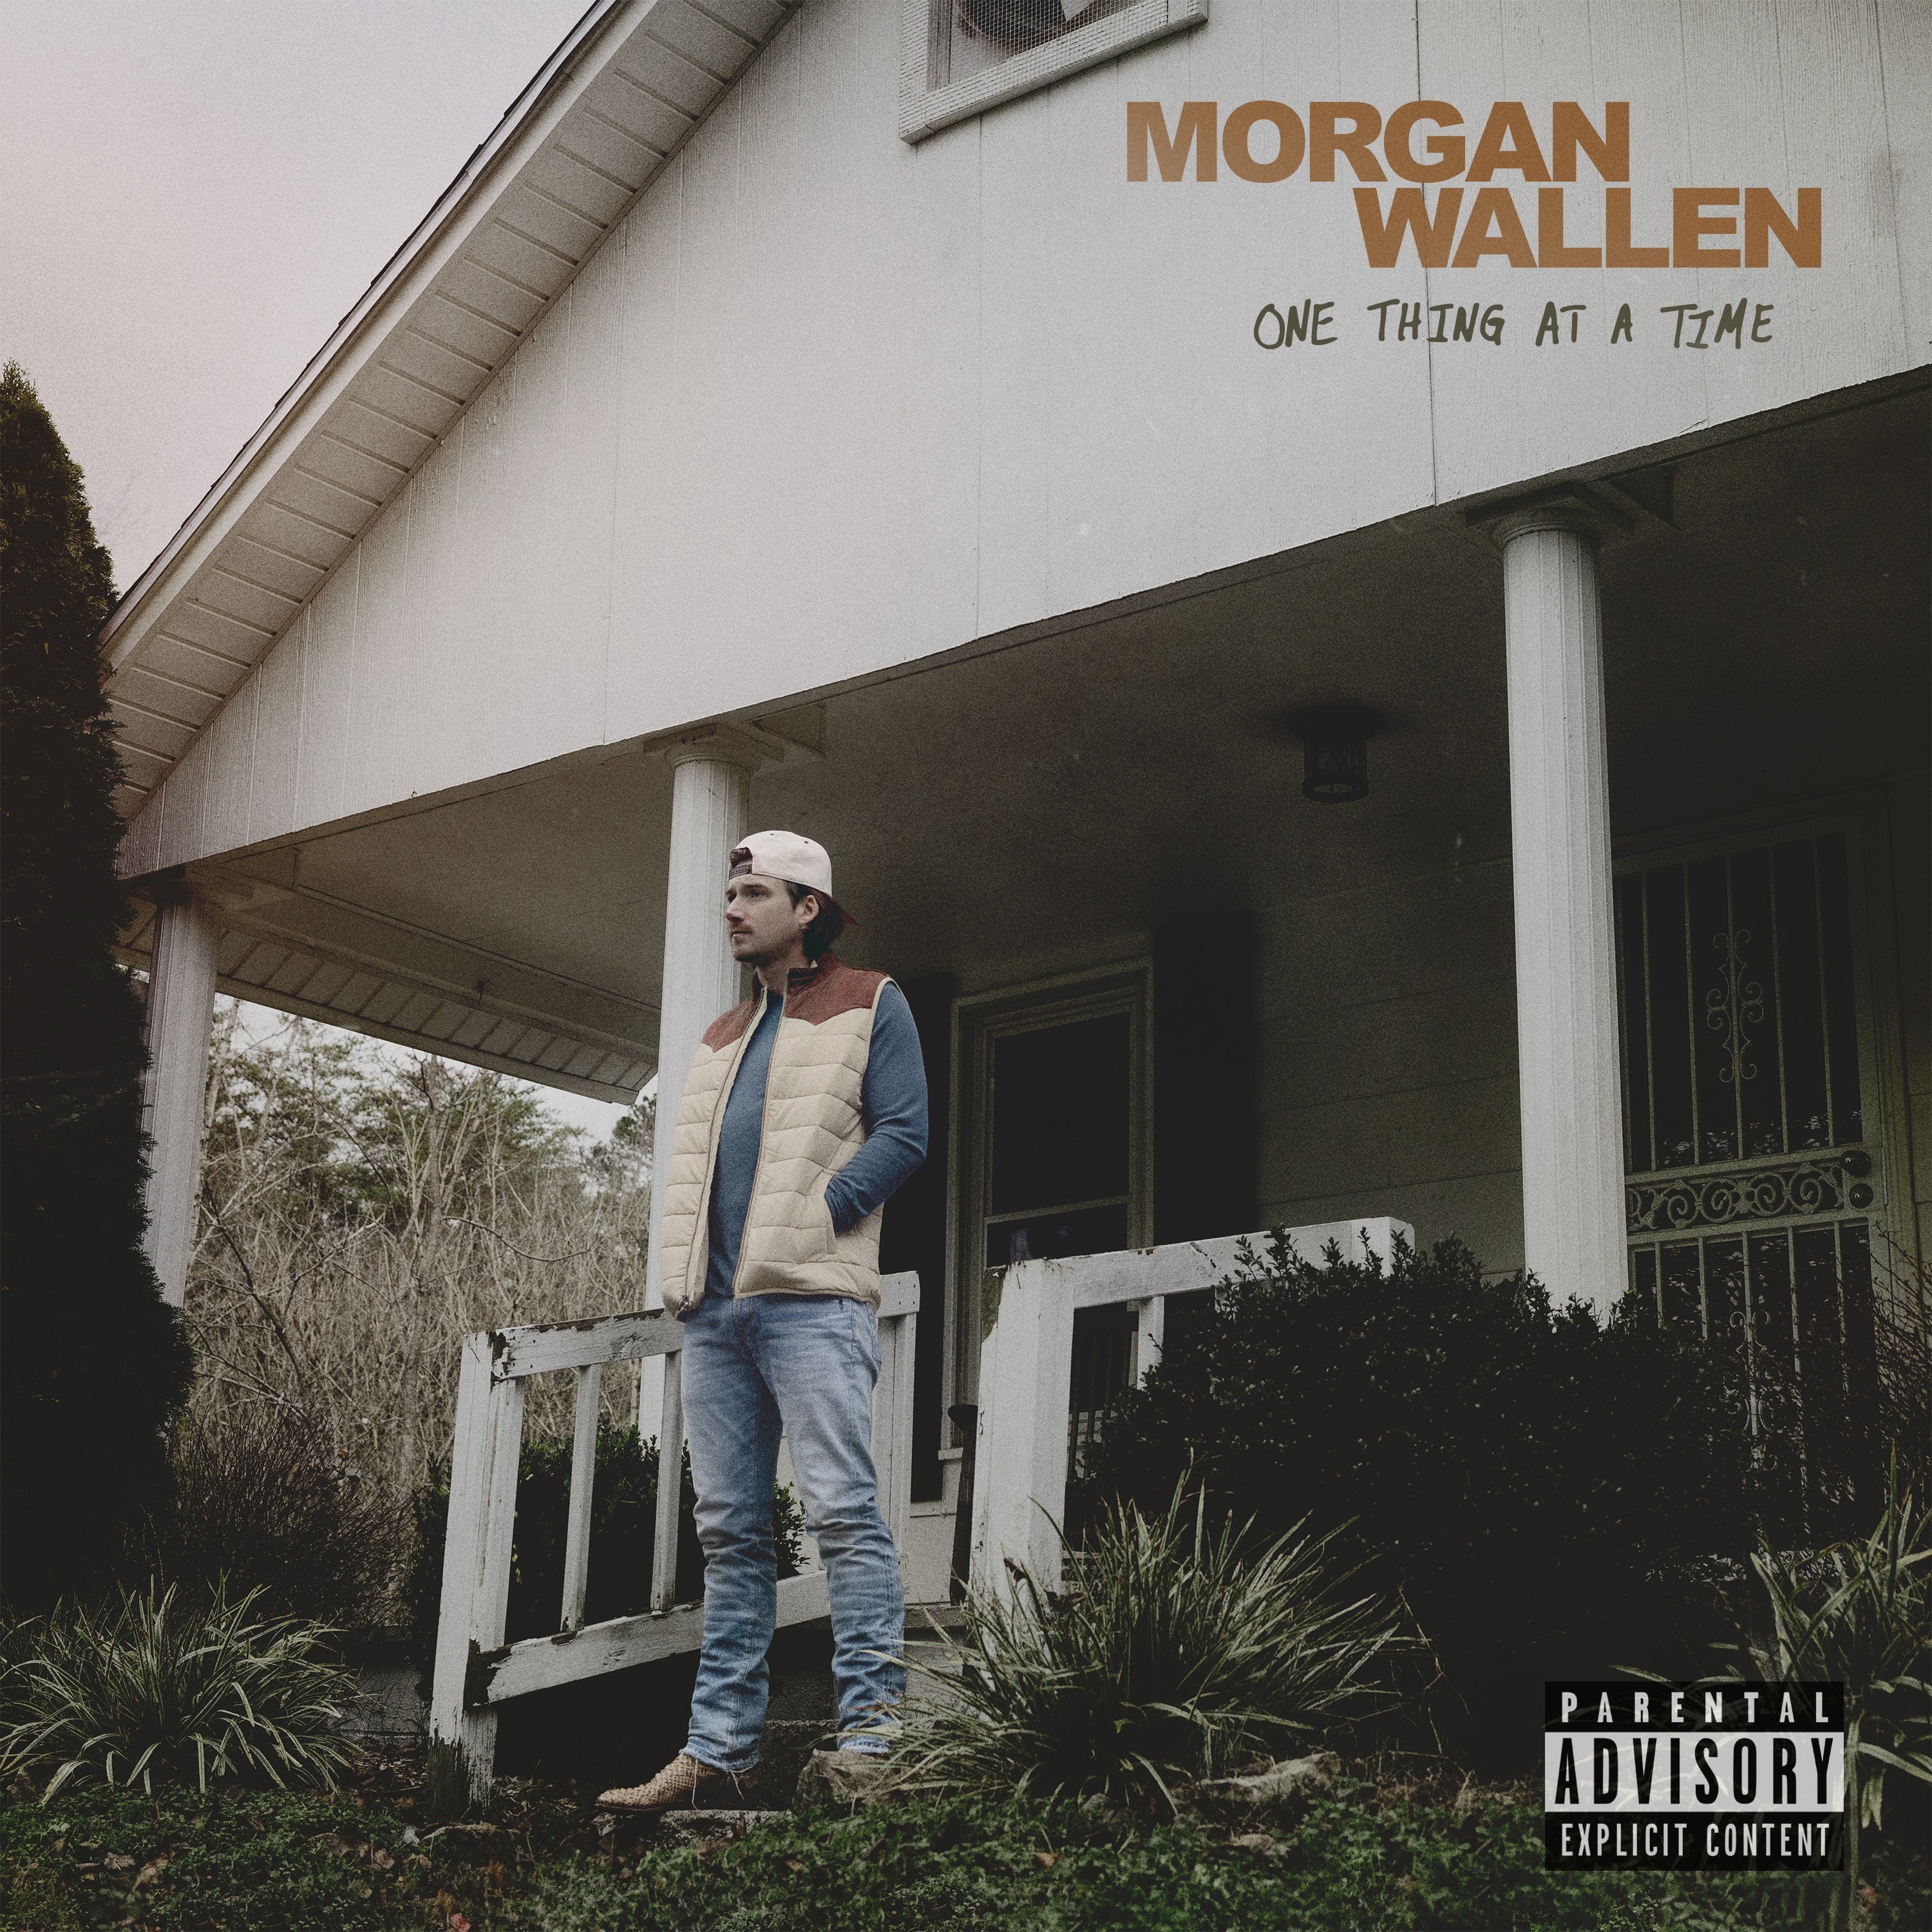 Morgan Wallen | One Thing At A Time [2 CD] | CD